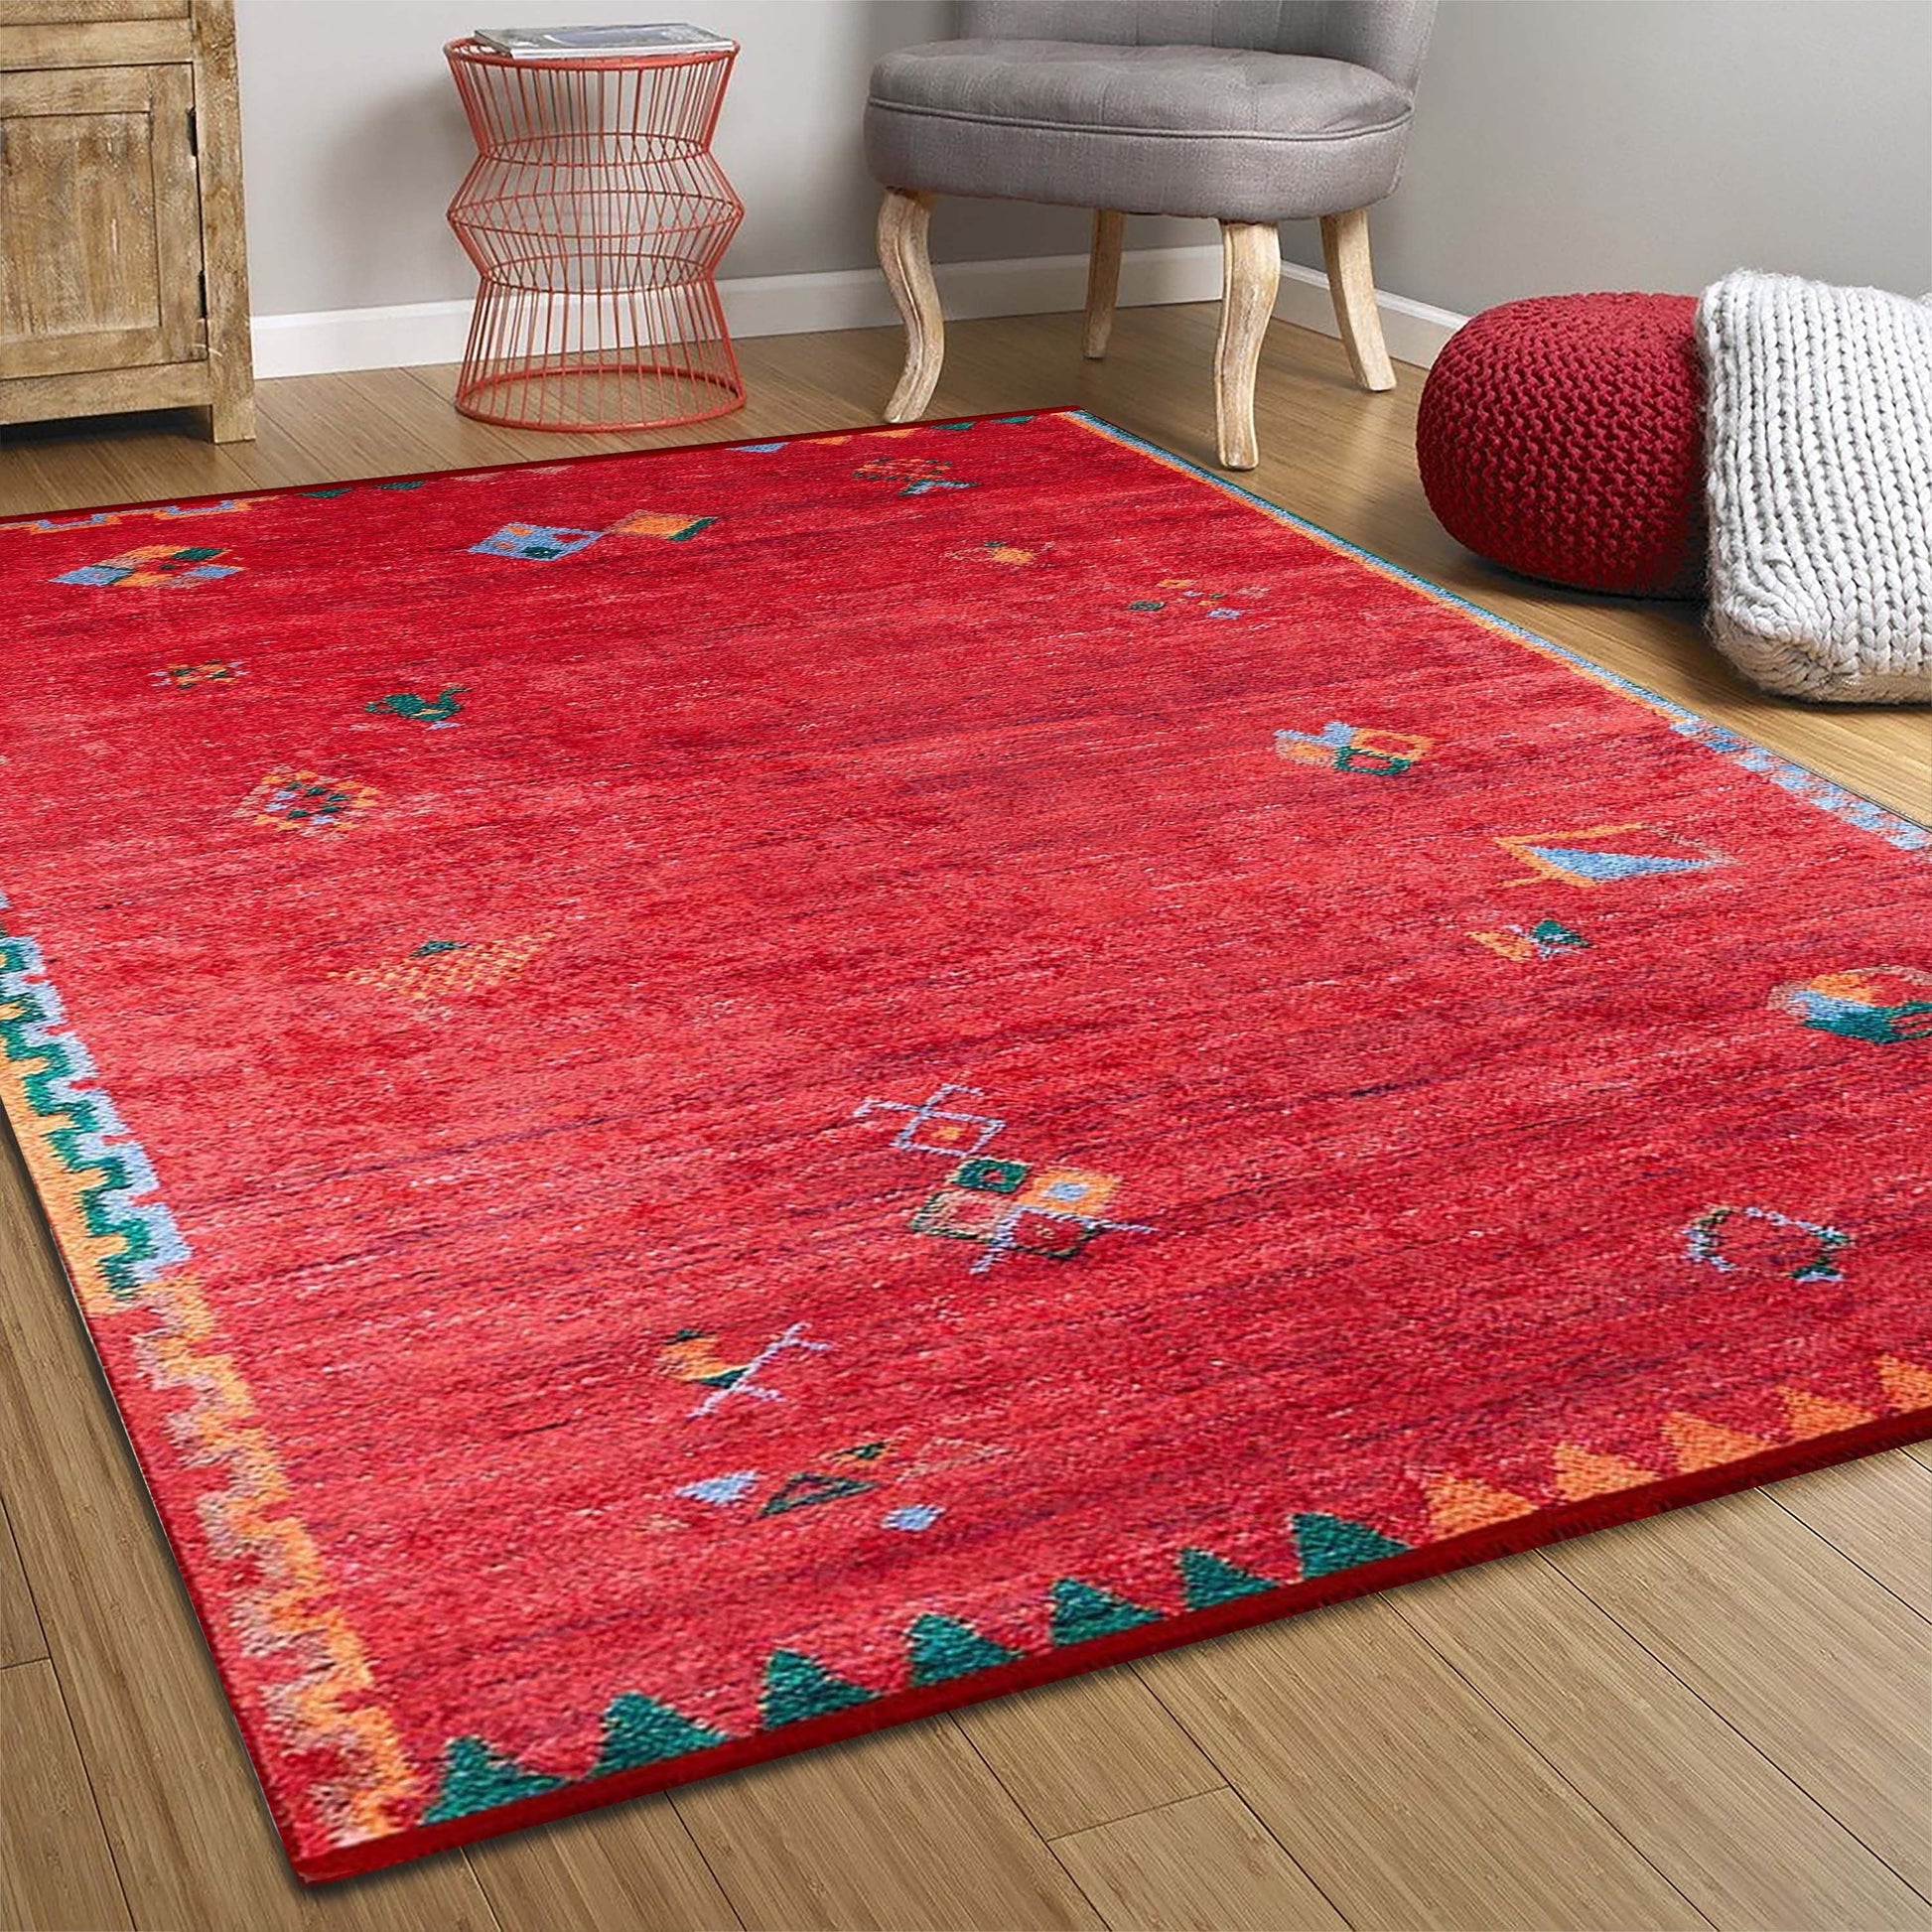 Small Rug, Small Persian Rug For Bedroom